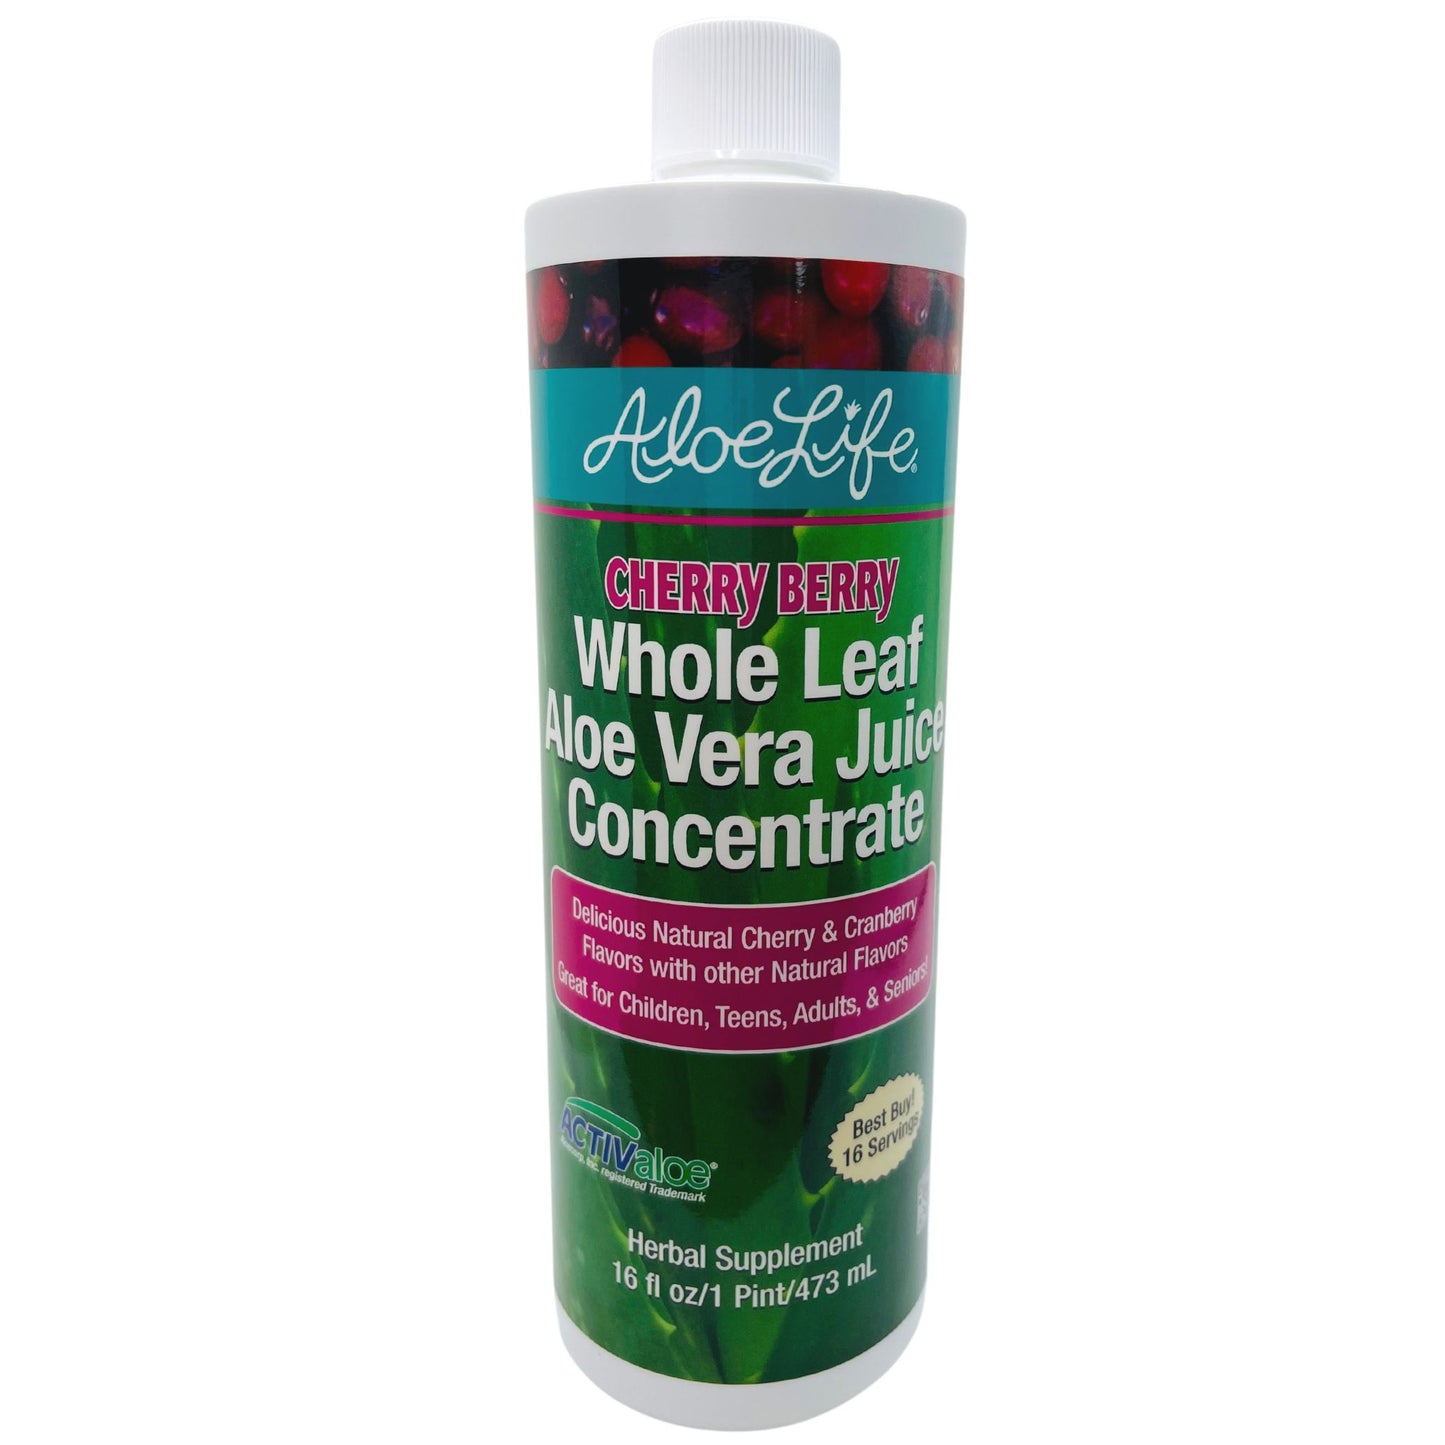 Cherry Berry Whole Leaf Aloe Juice Concentrate